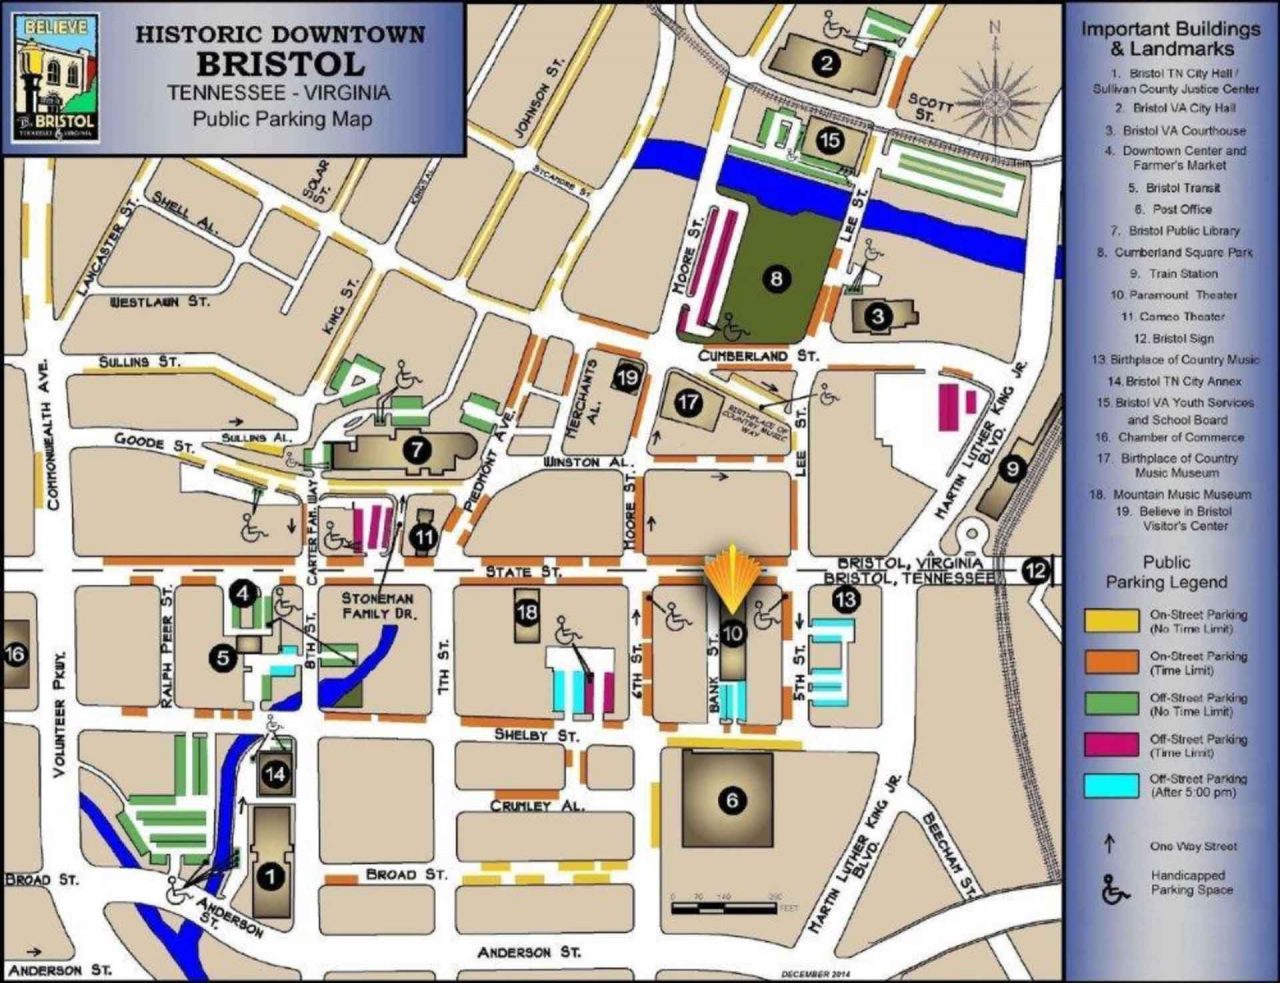 Historical Downtown Bristol Map 1280x983 